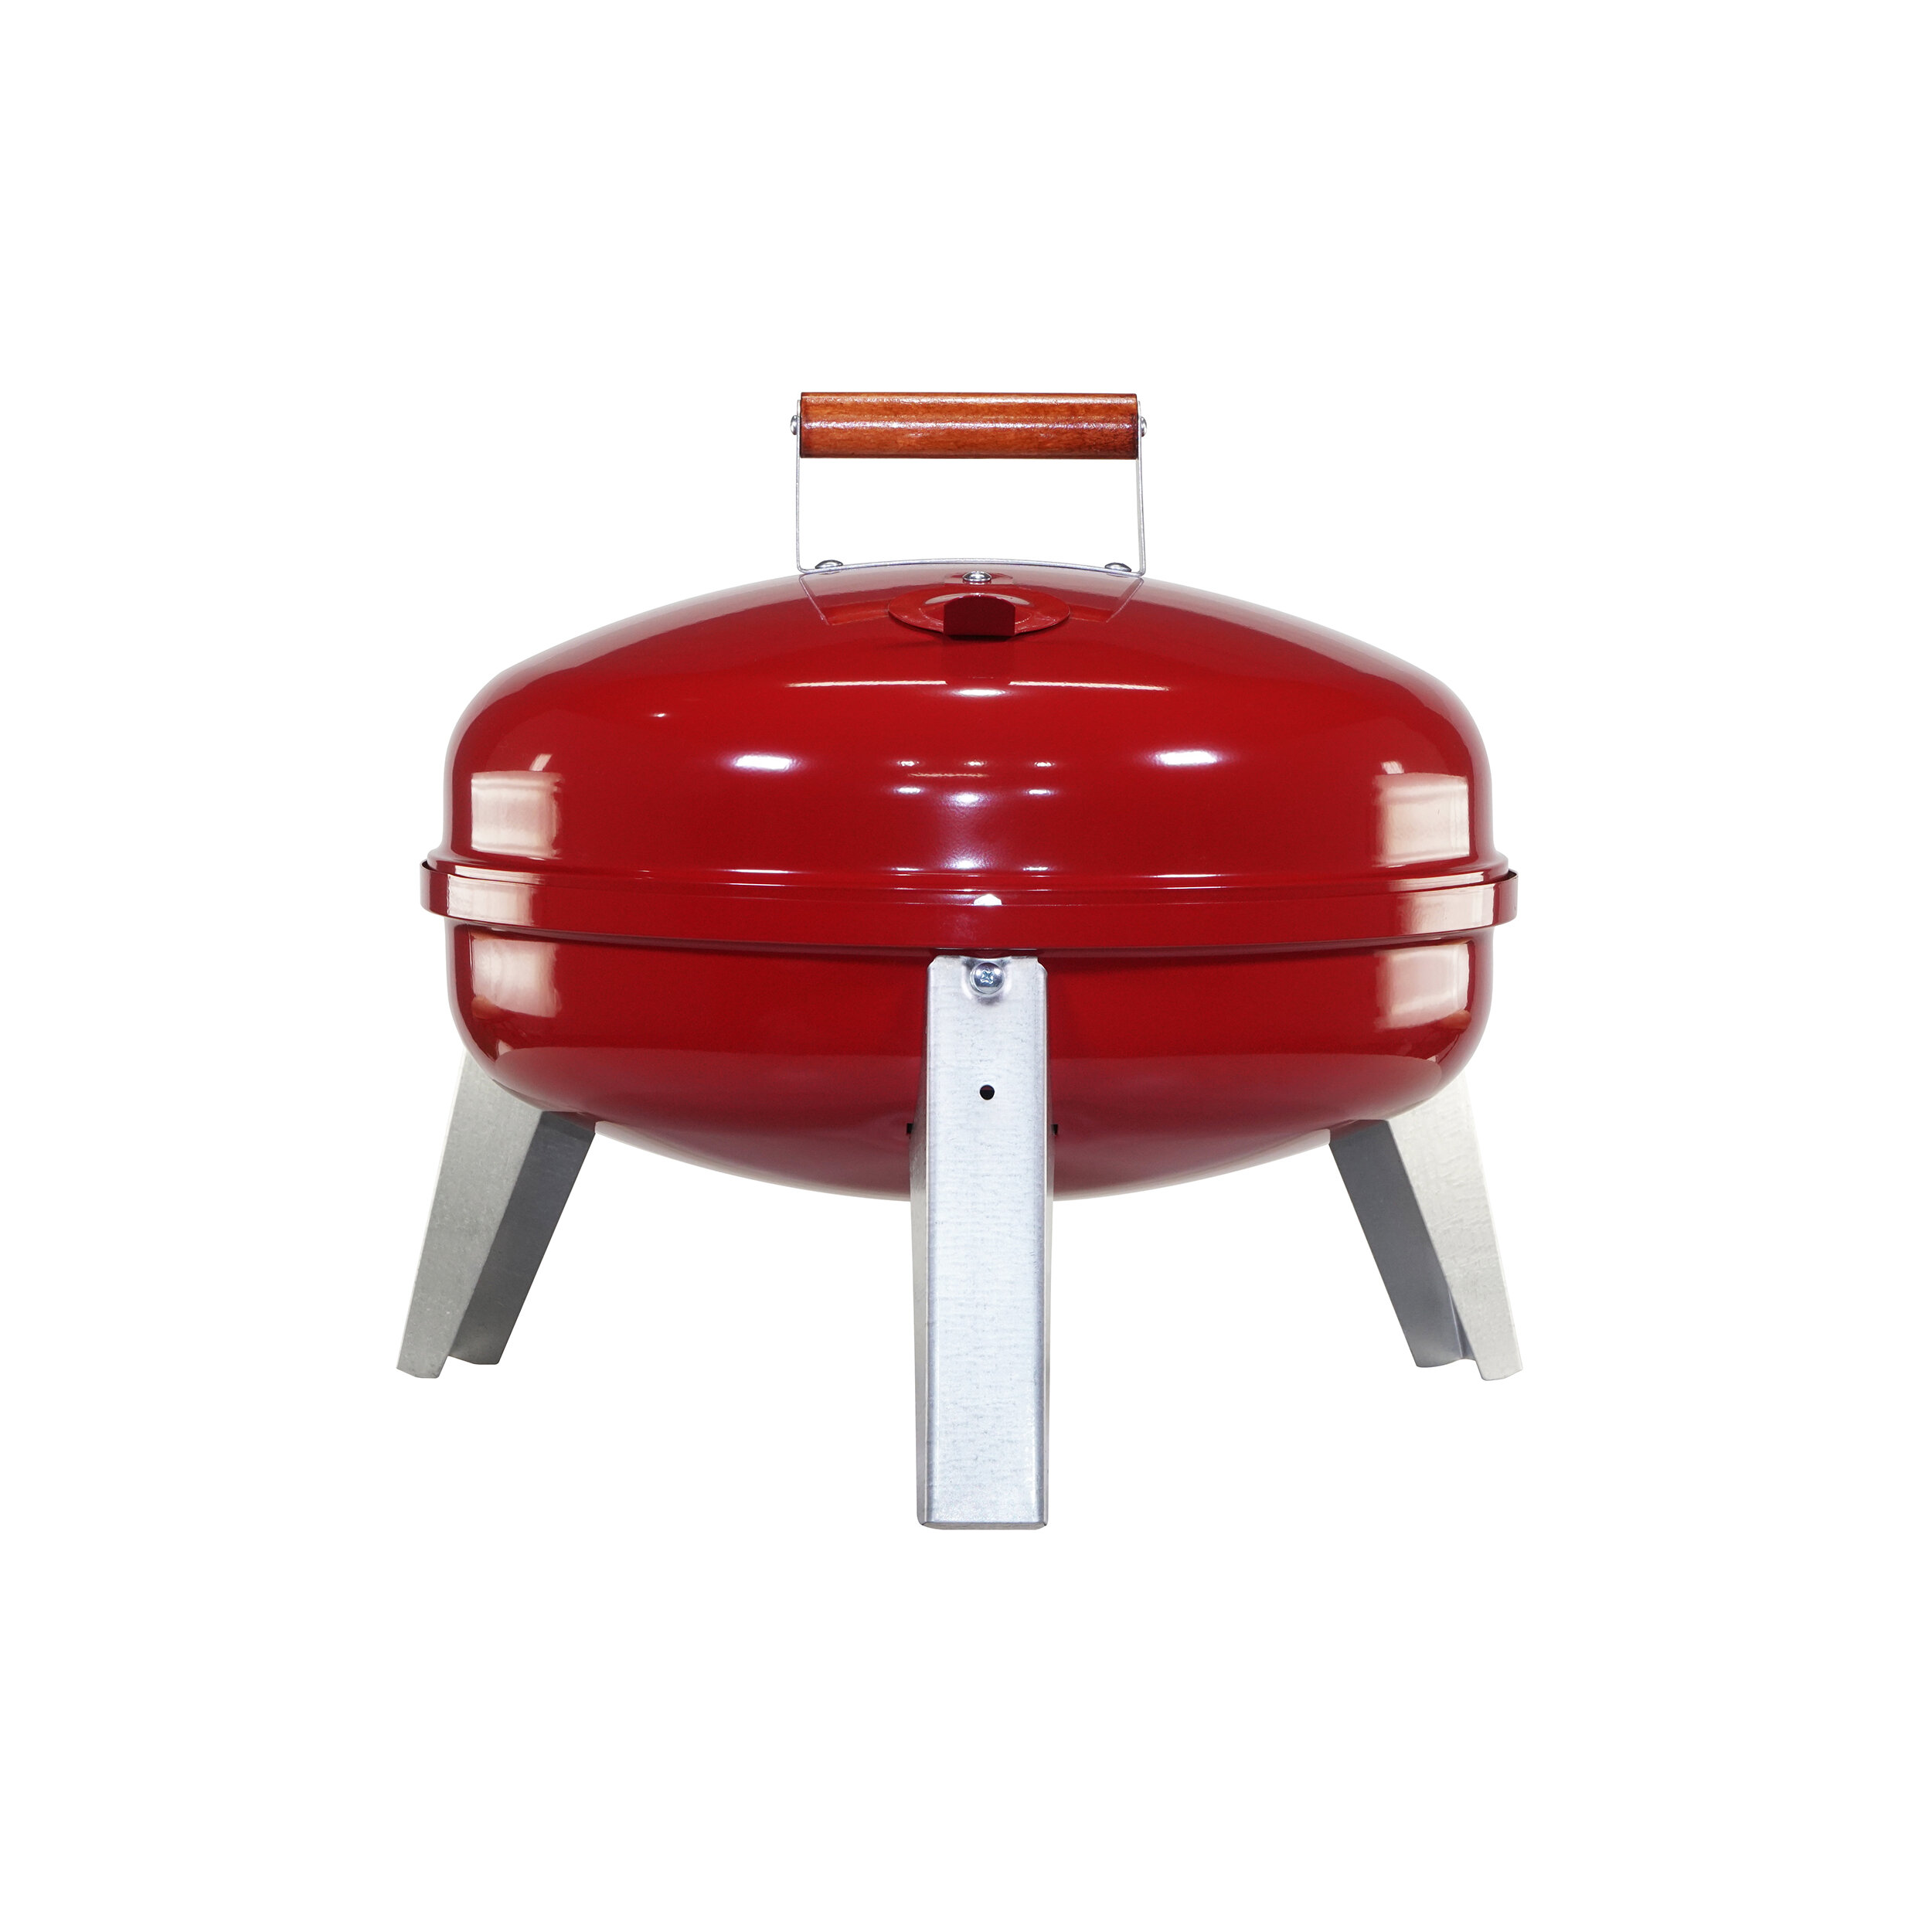  VANSTON Outdoor Electric Barbecue Grill & Smoker with